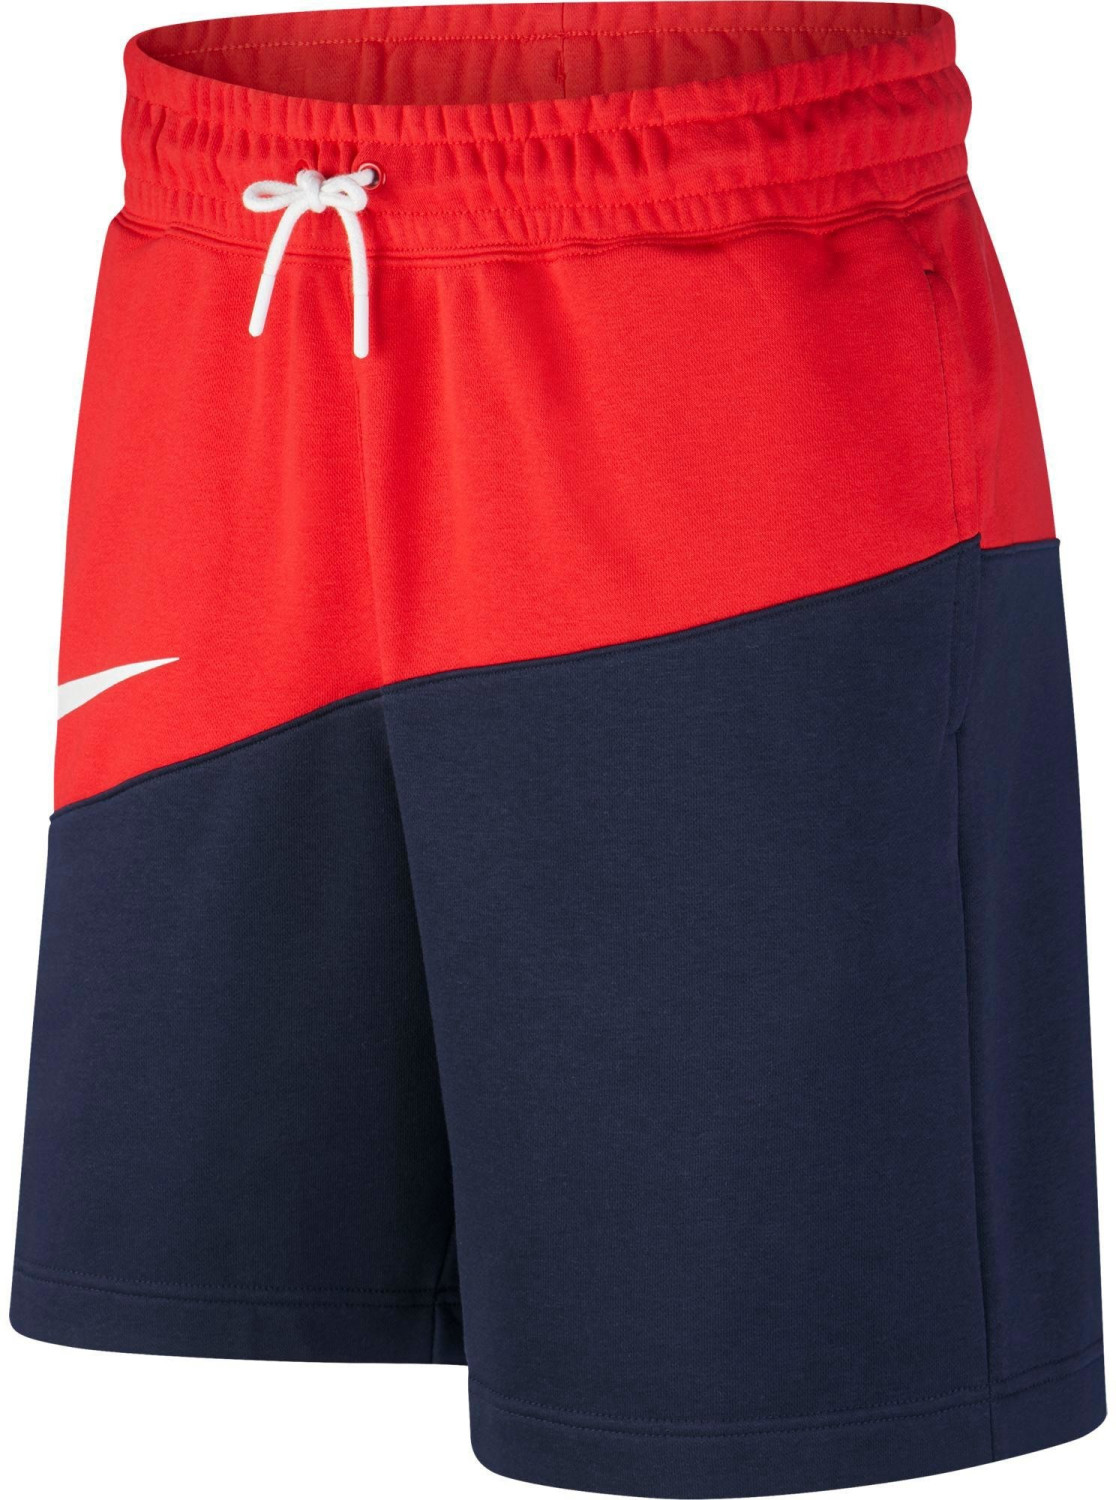 nike red and white shorts